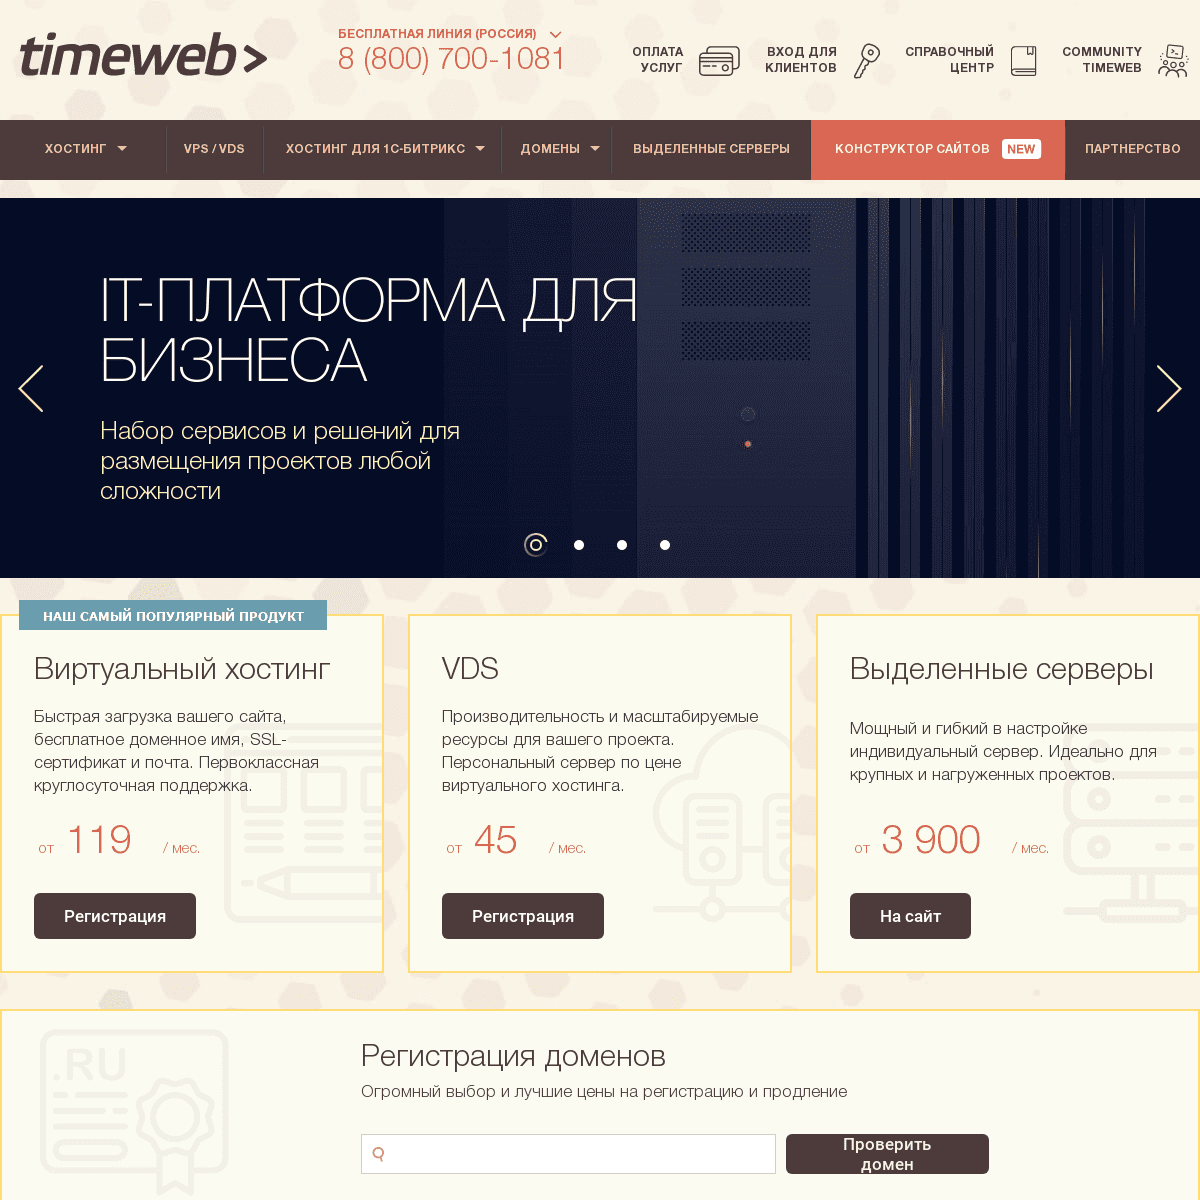 A complete backup of https://timeweb.com